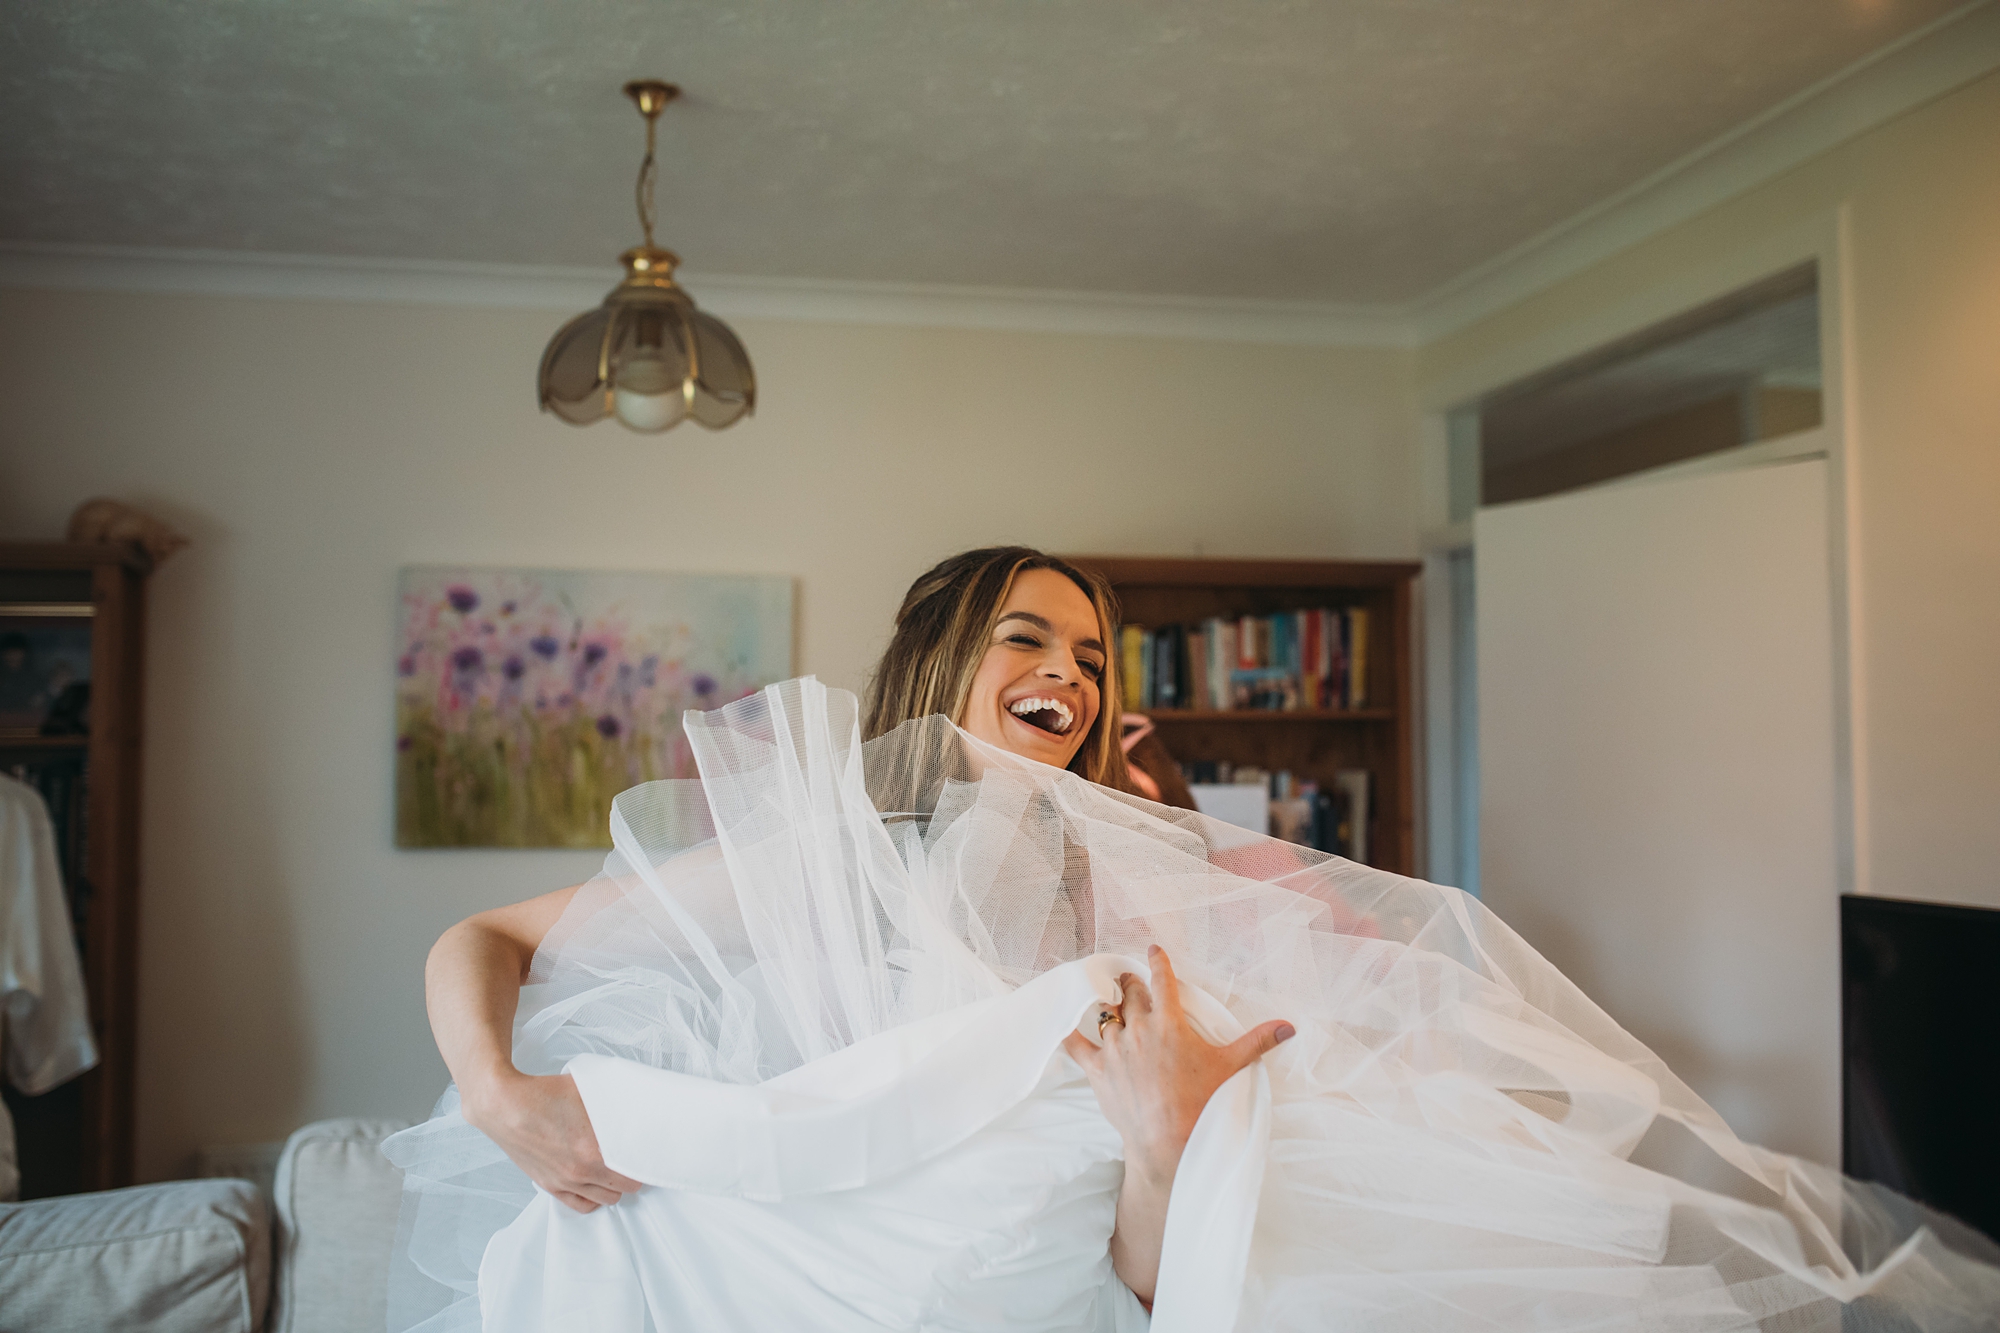 best wedding photographs of sister helping the bride get ready, laughing at size of dress